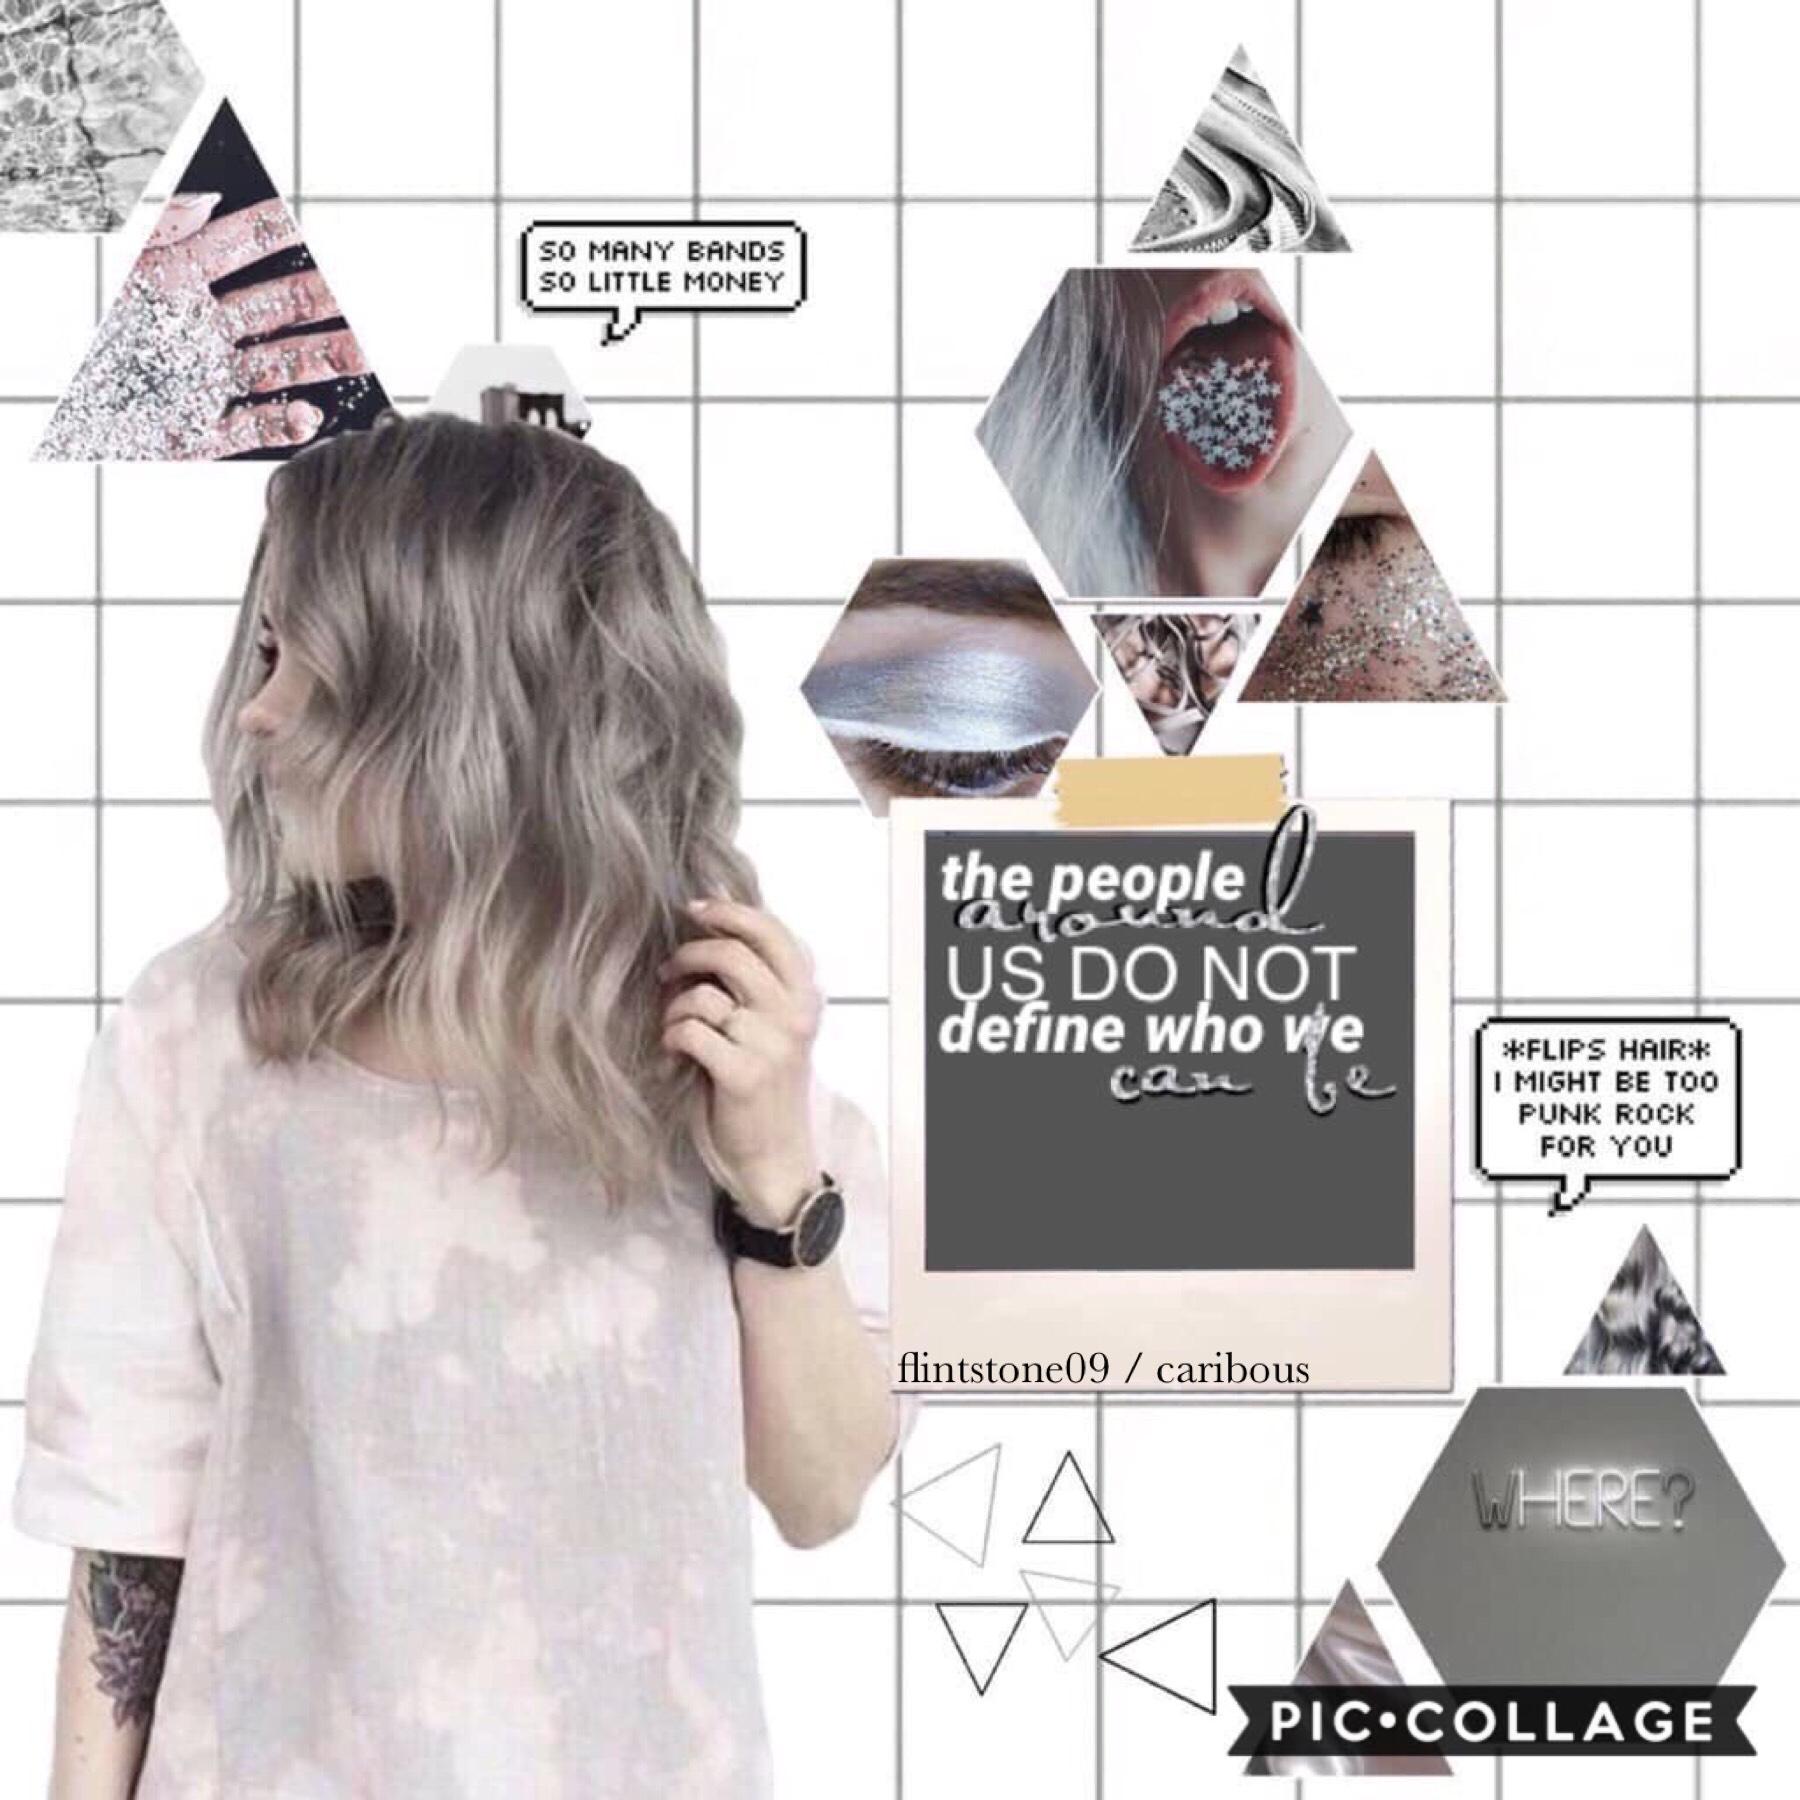 8th post of theme. 👽TAP👽

Collab with———caribous!!🔥She is super good at text...as u can see😁
GO FOLLOW HER!! She was super sweet, even though I was being a noob at collabs😅
GRAY

no one does my question of the day anymore😭😂
QOTD: Do you spell “gray” with 